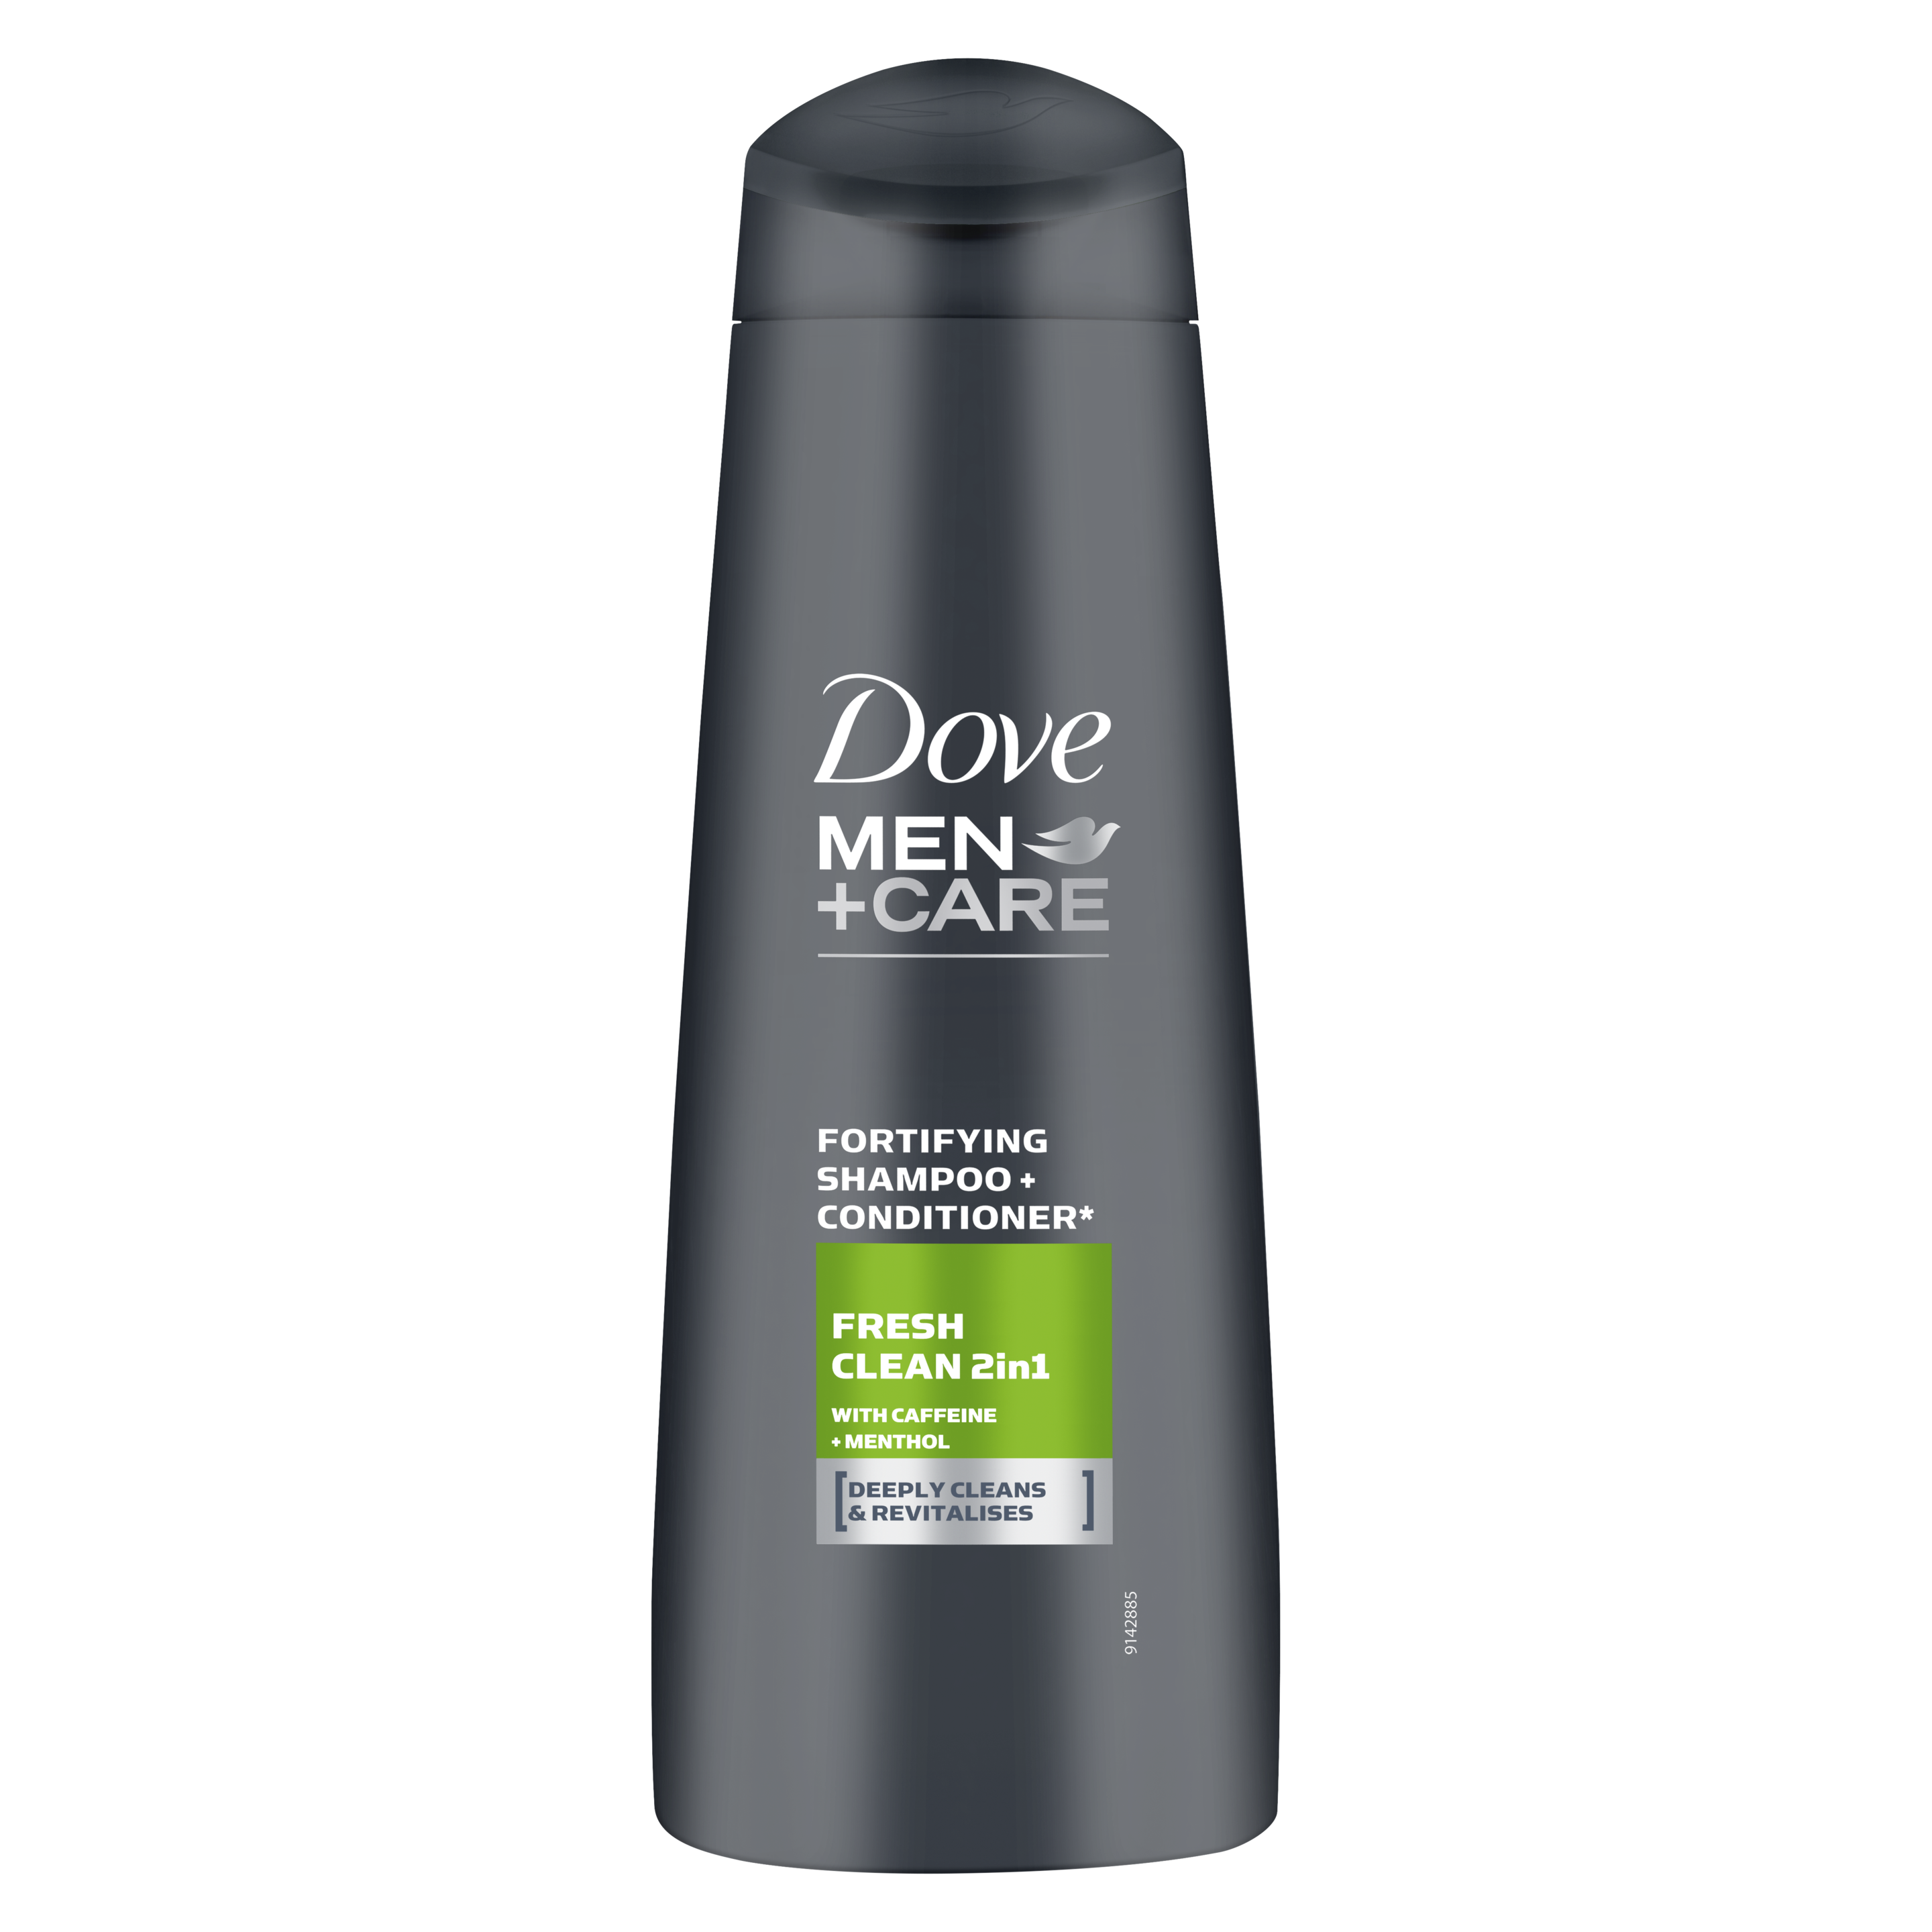 Dove Men+Care Fresh Clean Fortifying 2 in 1 shampoo 250ml